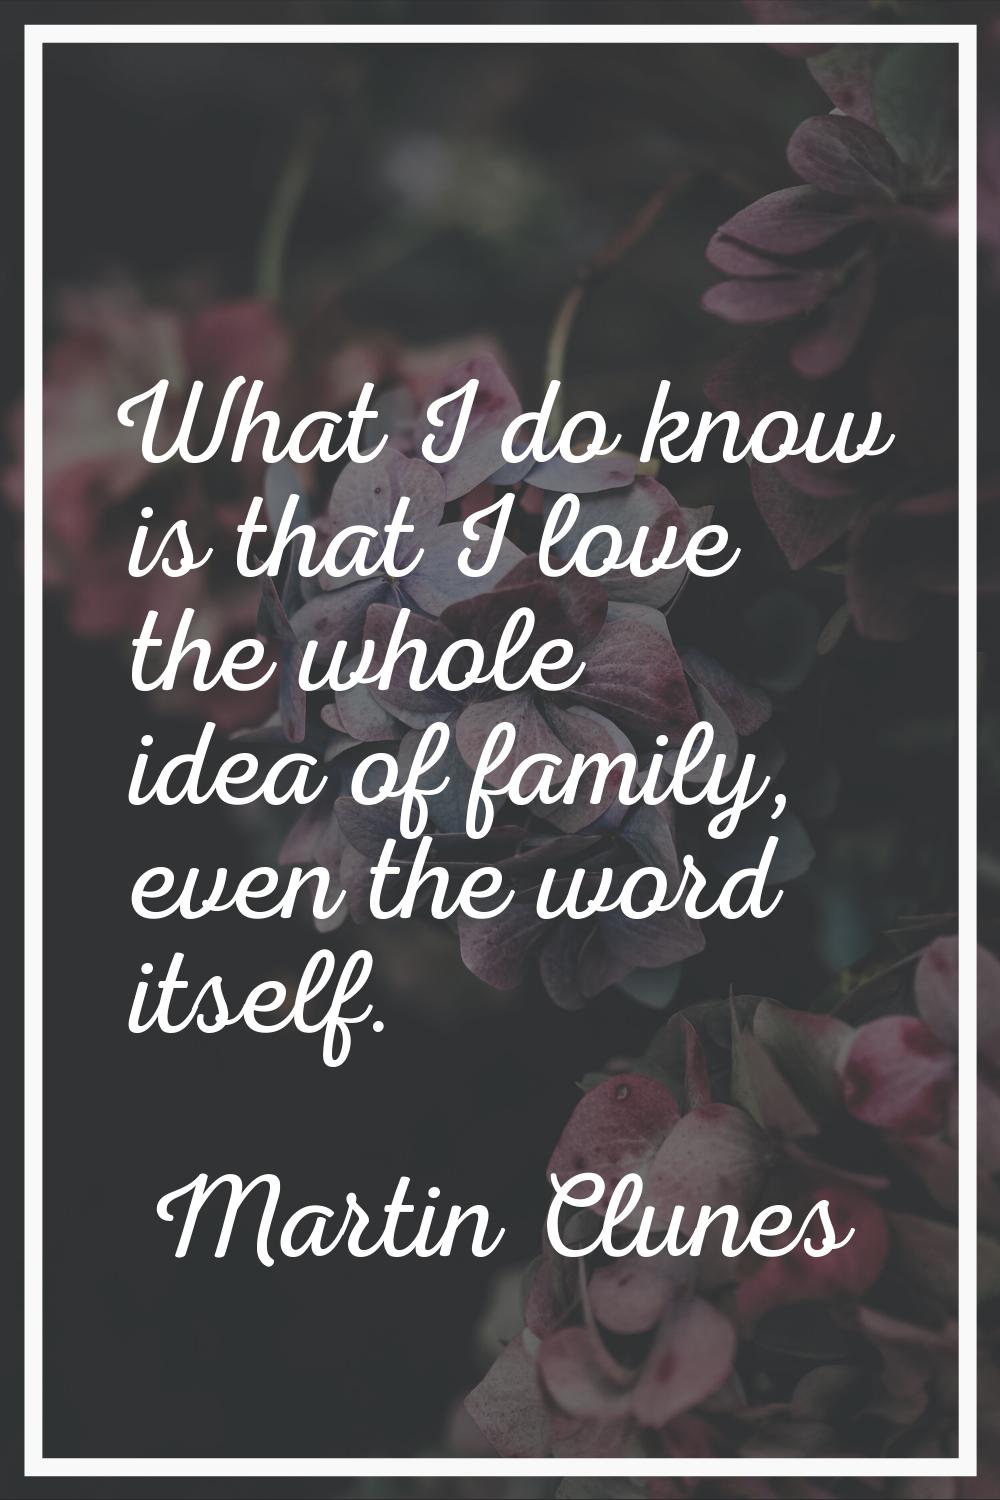 What I do know is that I love the whole idea of family, even the word itself.